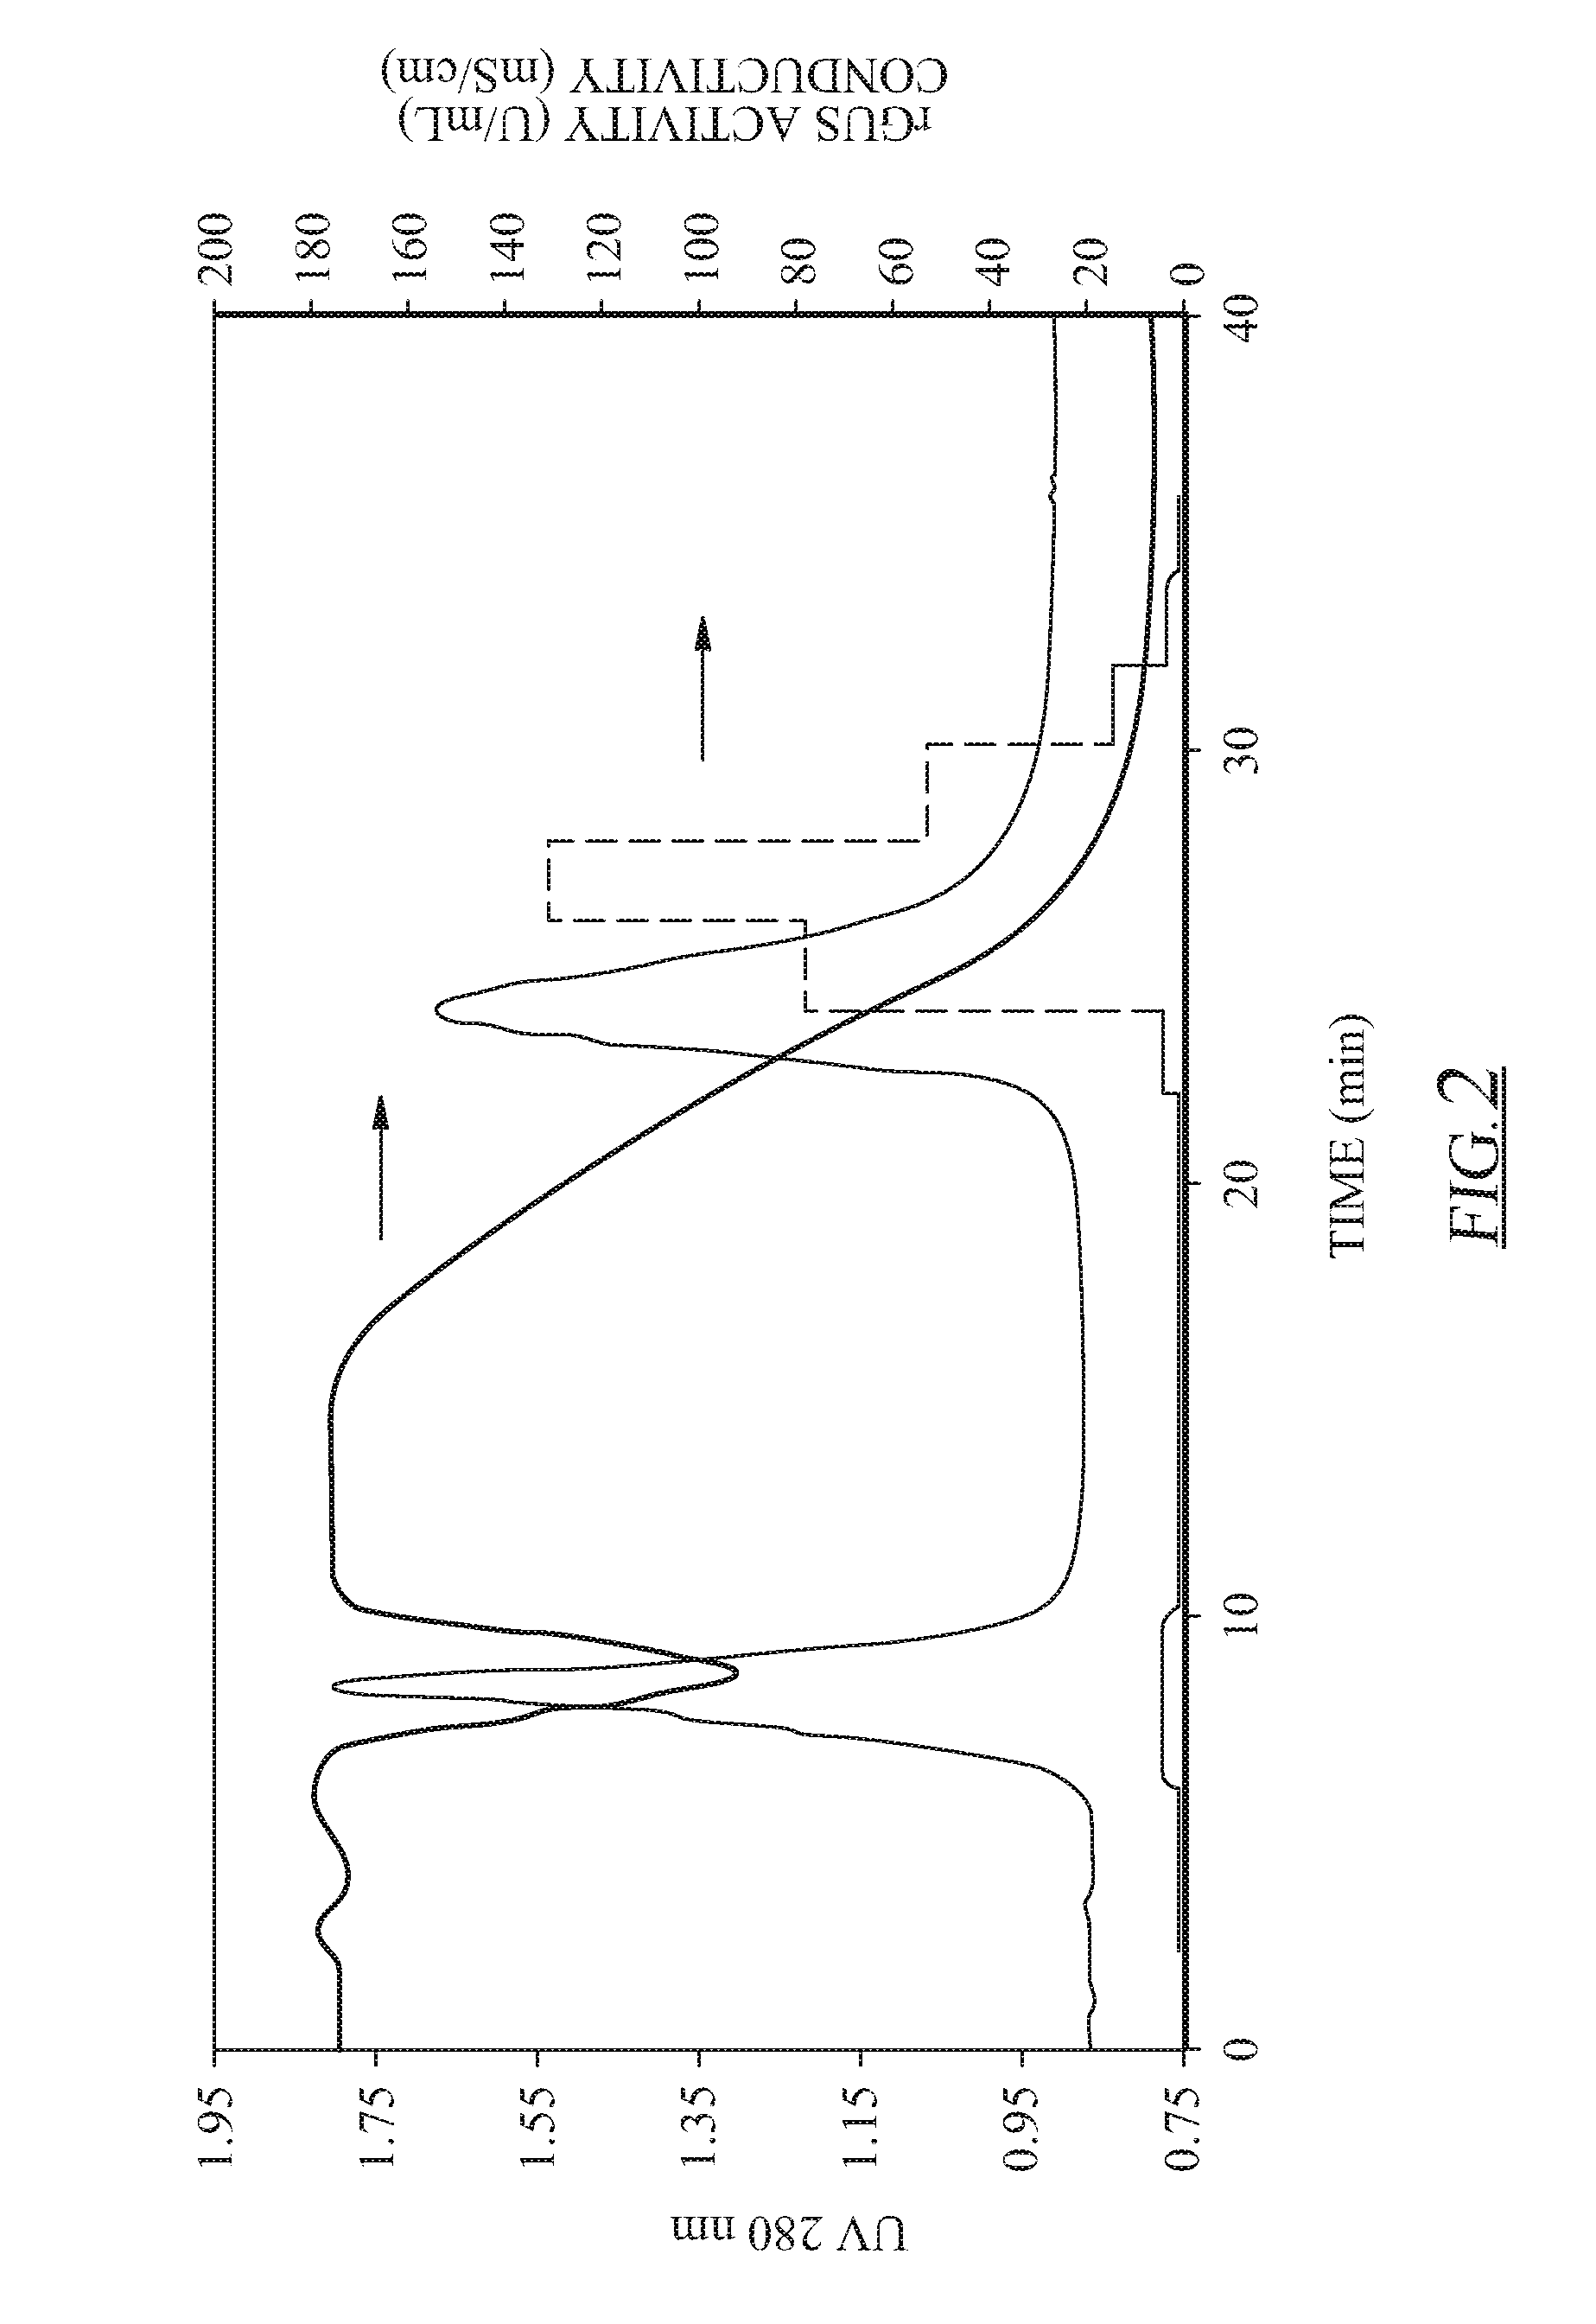 Method of purifying acidic proteins expressed in plants